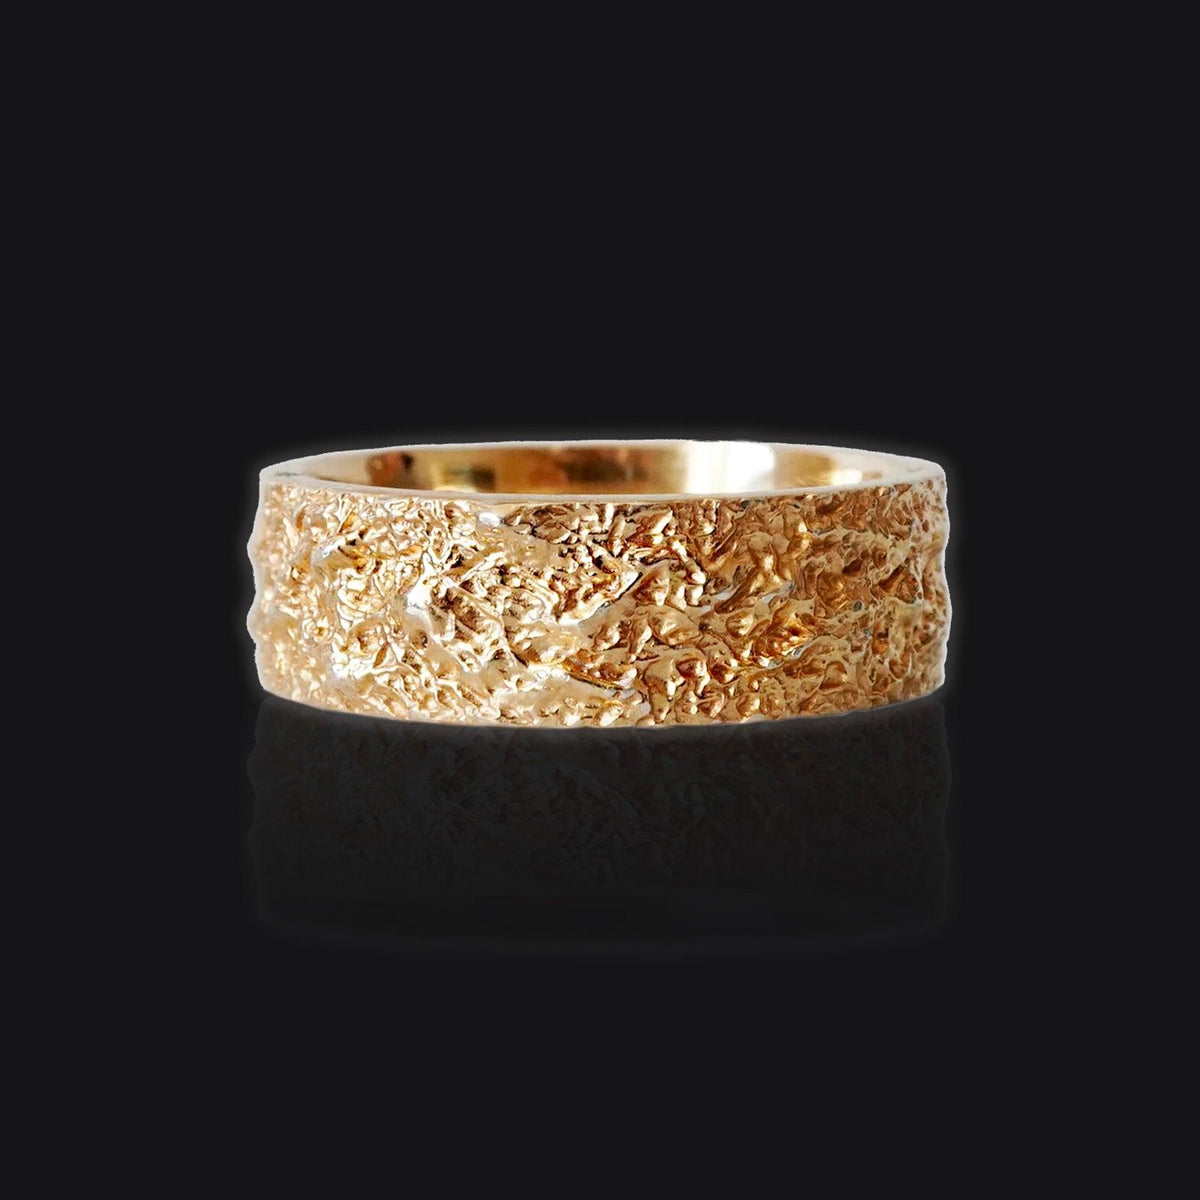 Meteoroid Ring Band in Sterling Silver, 14K and 18K Gold, 7.2mm - Tippy Taste Jewelry